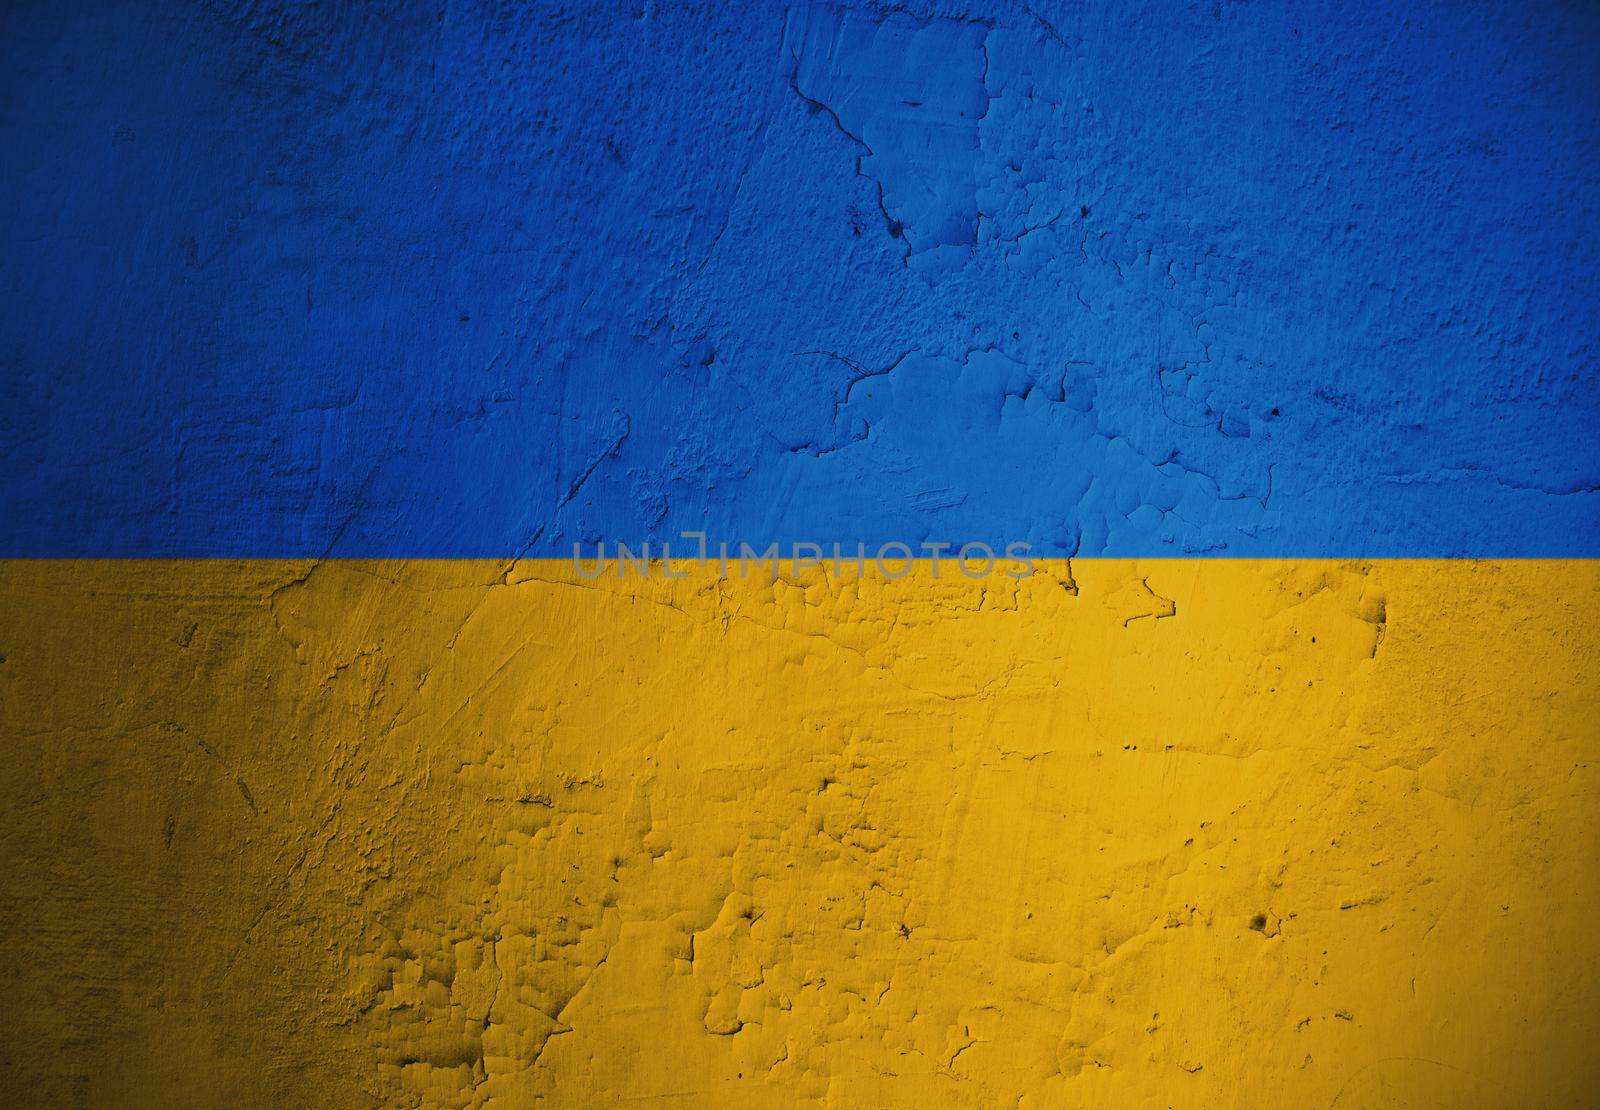 Grungy and damaged wall painted with blue and yellow paint like  Ukrainian flag by Novic